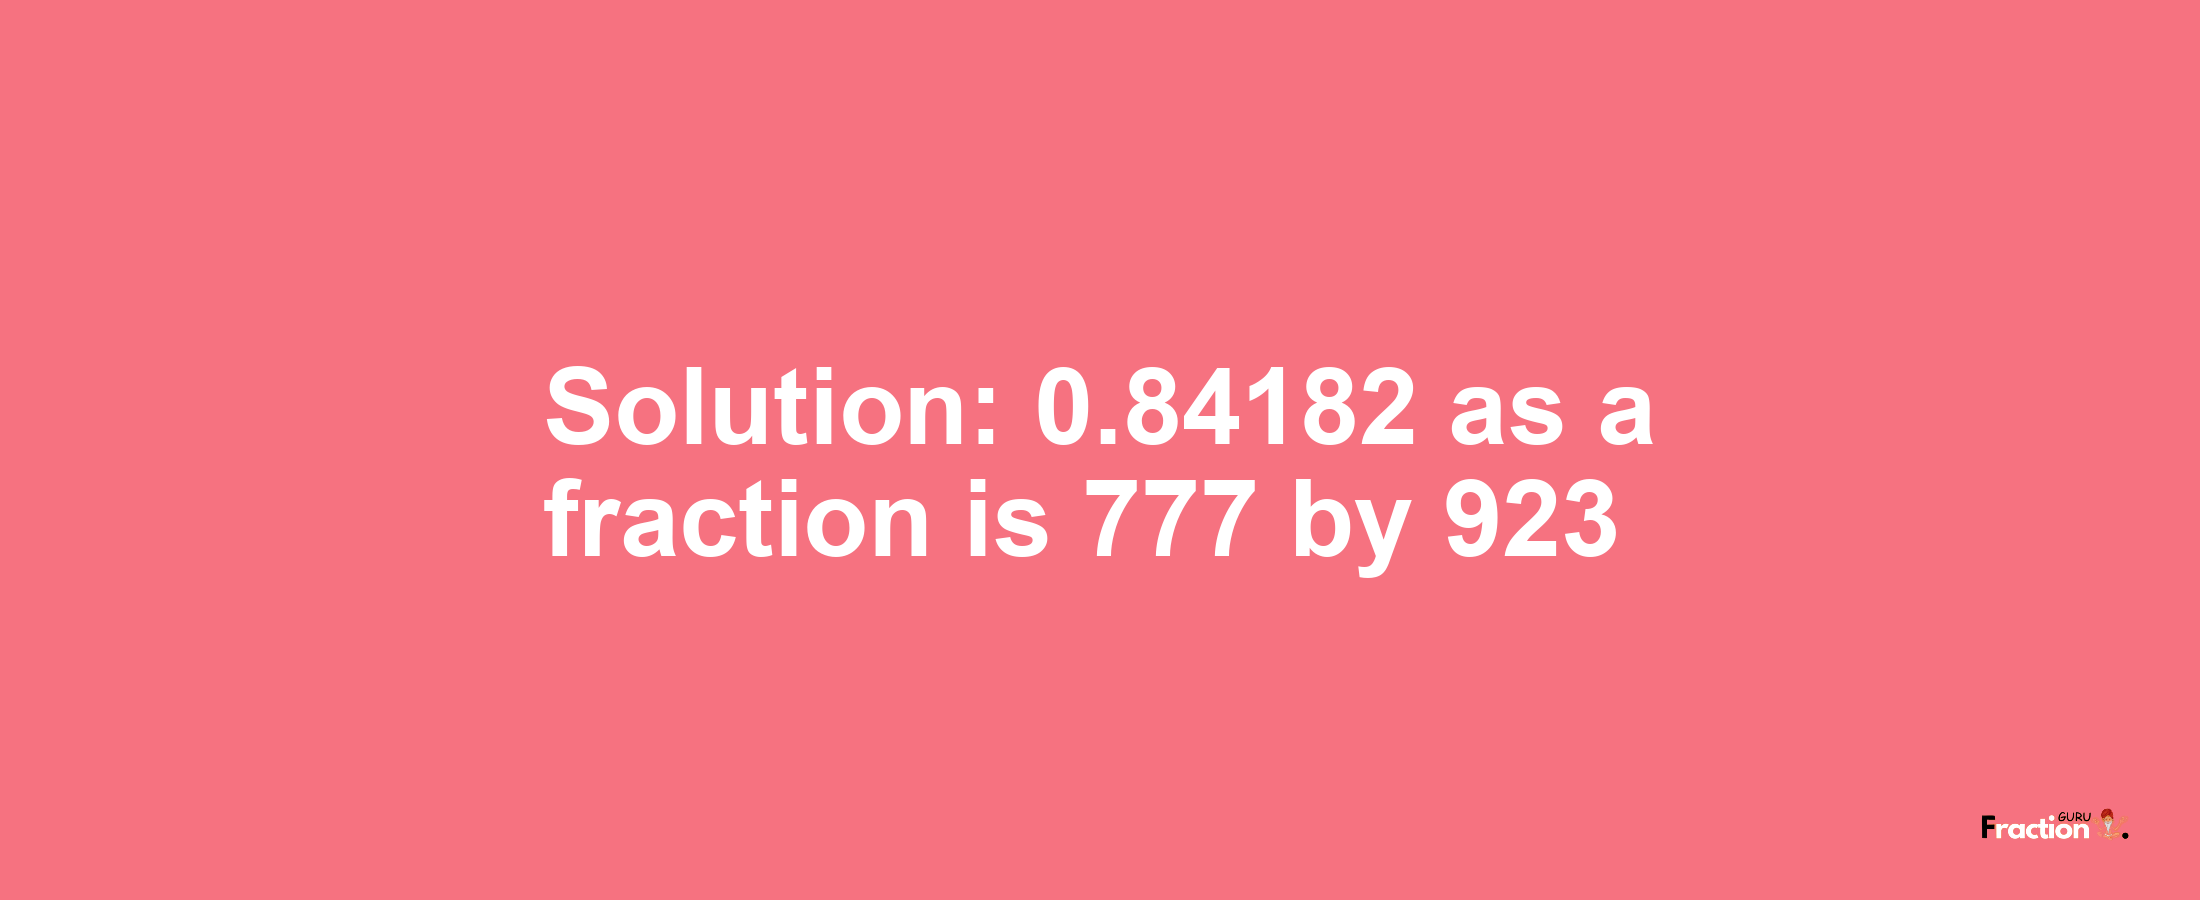 Solution:0.84182 as a fraction is 777/923